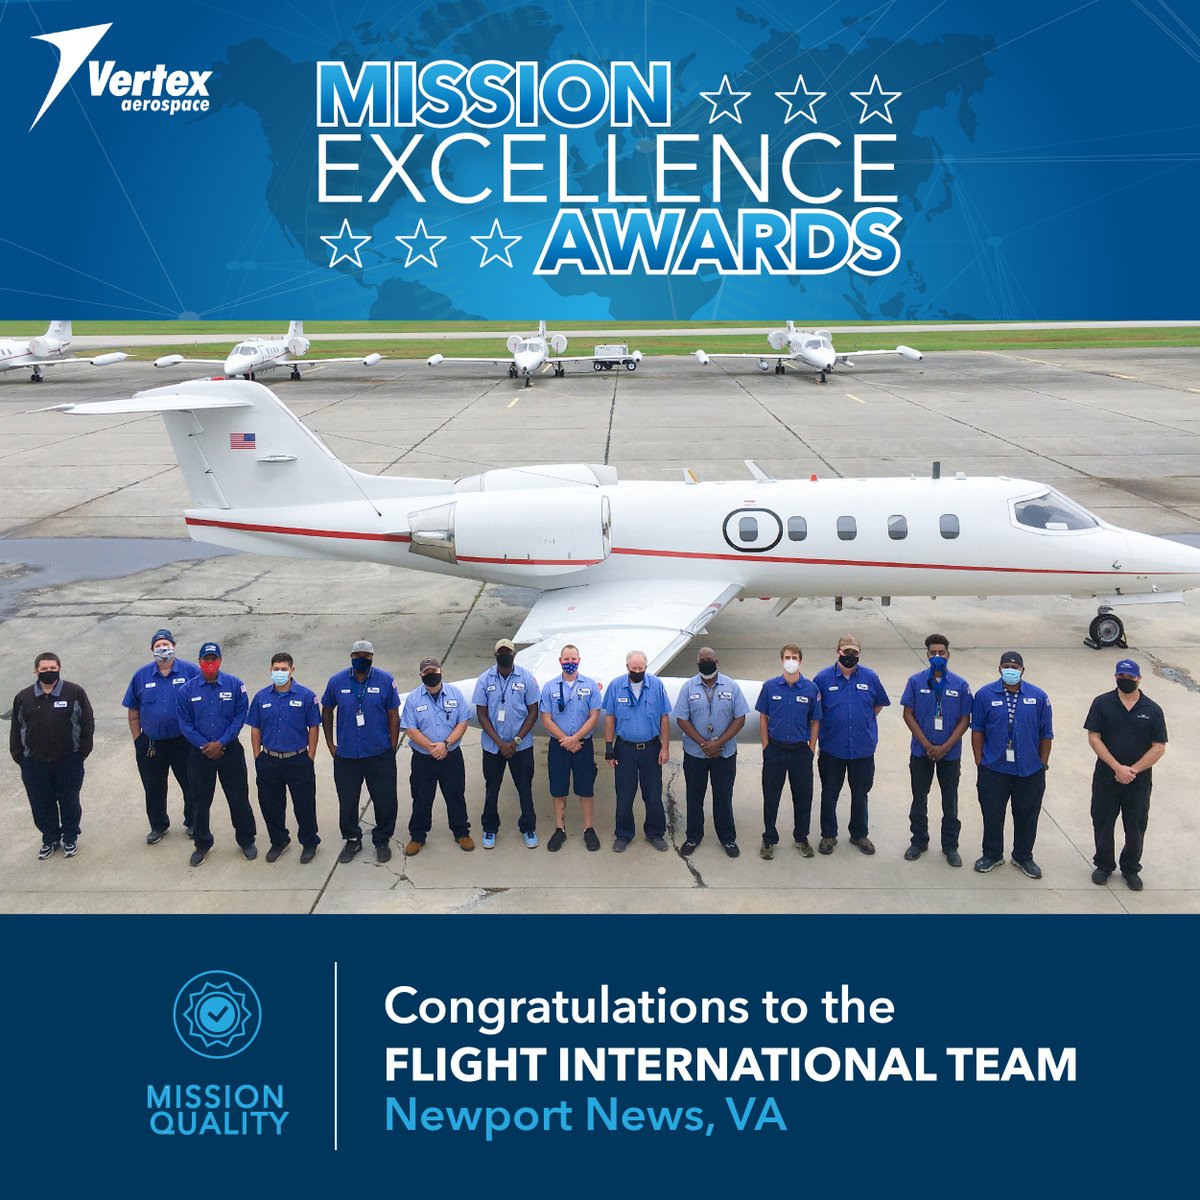 Congrats to our Flight International team for their excellence award in #MissionQuality. The team maintained a 12-month Mission Success Rate (MSR) of 98% exceeding contract requirements of 85%. Click here to learn more about our Flight International team > bit.ly/32Y3Tgr